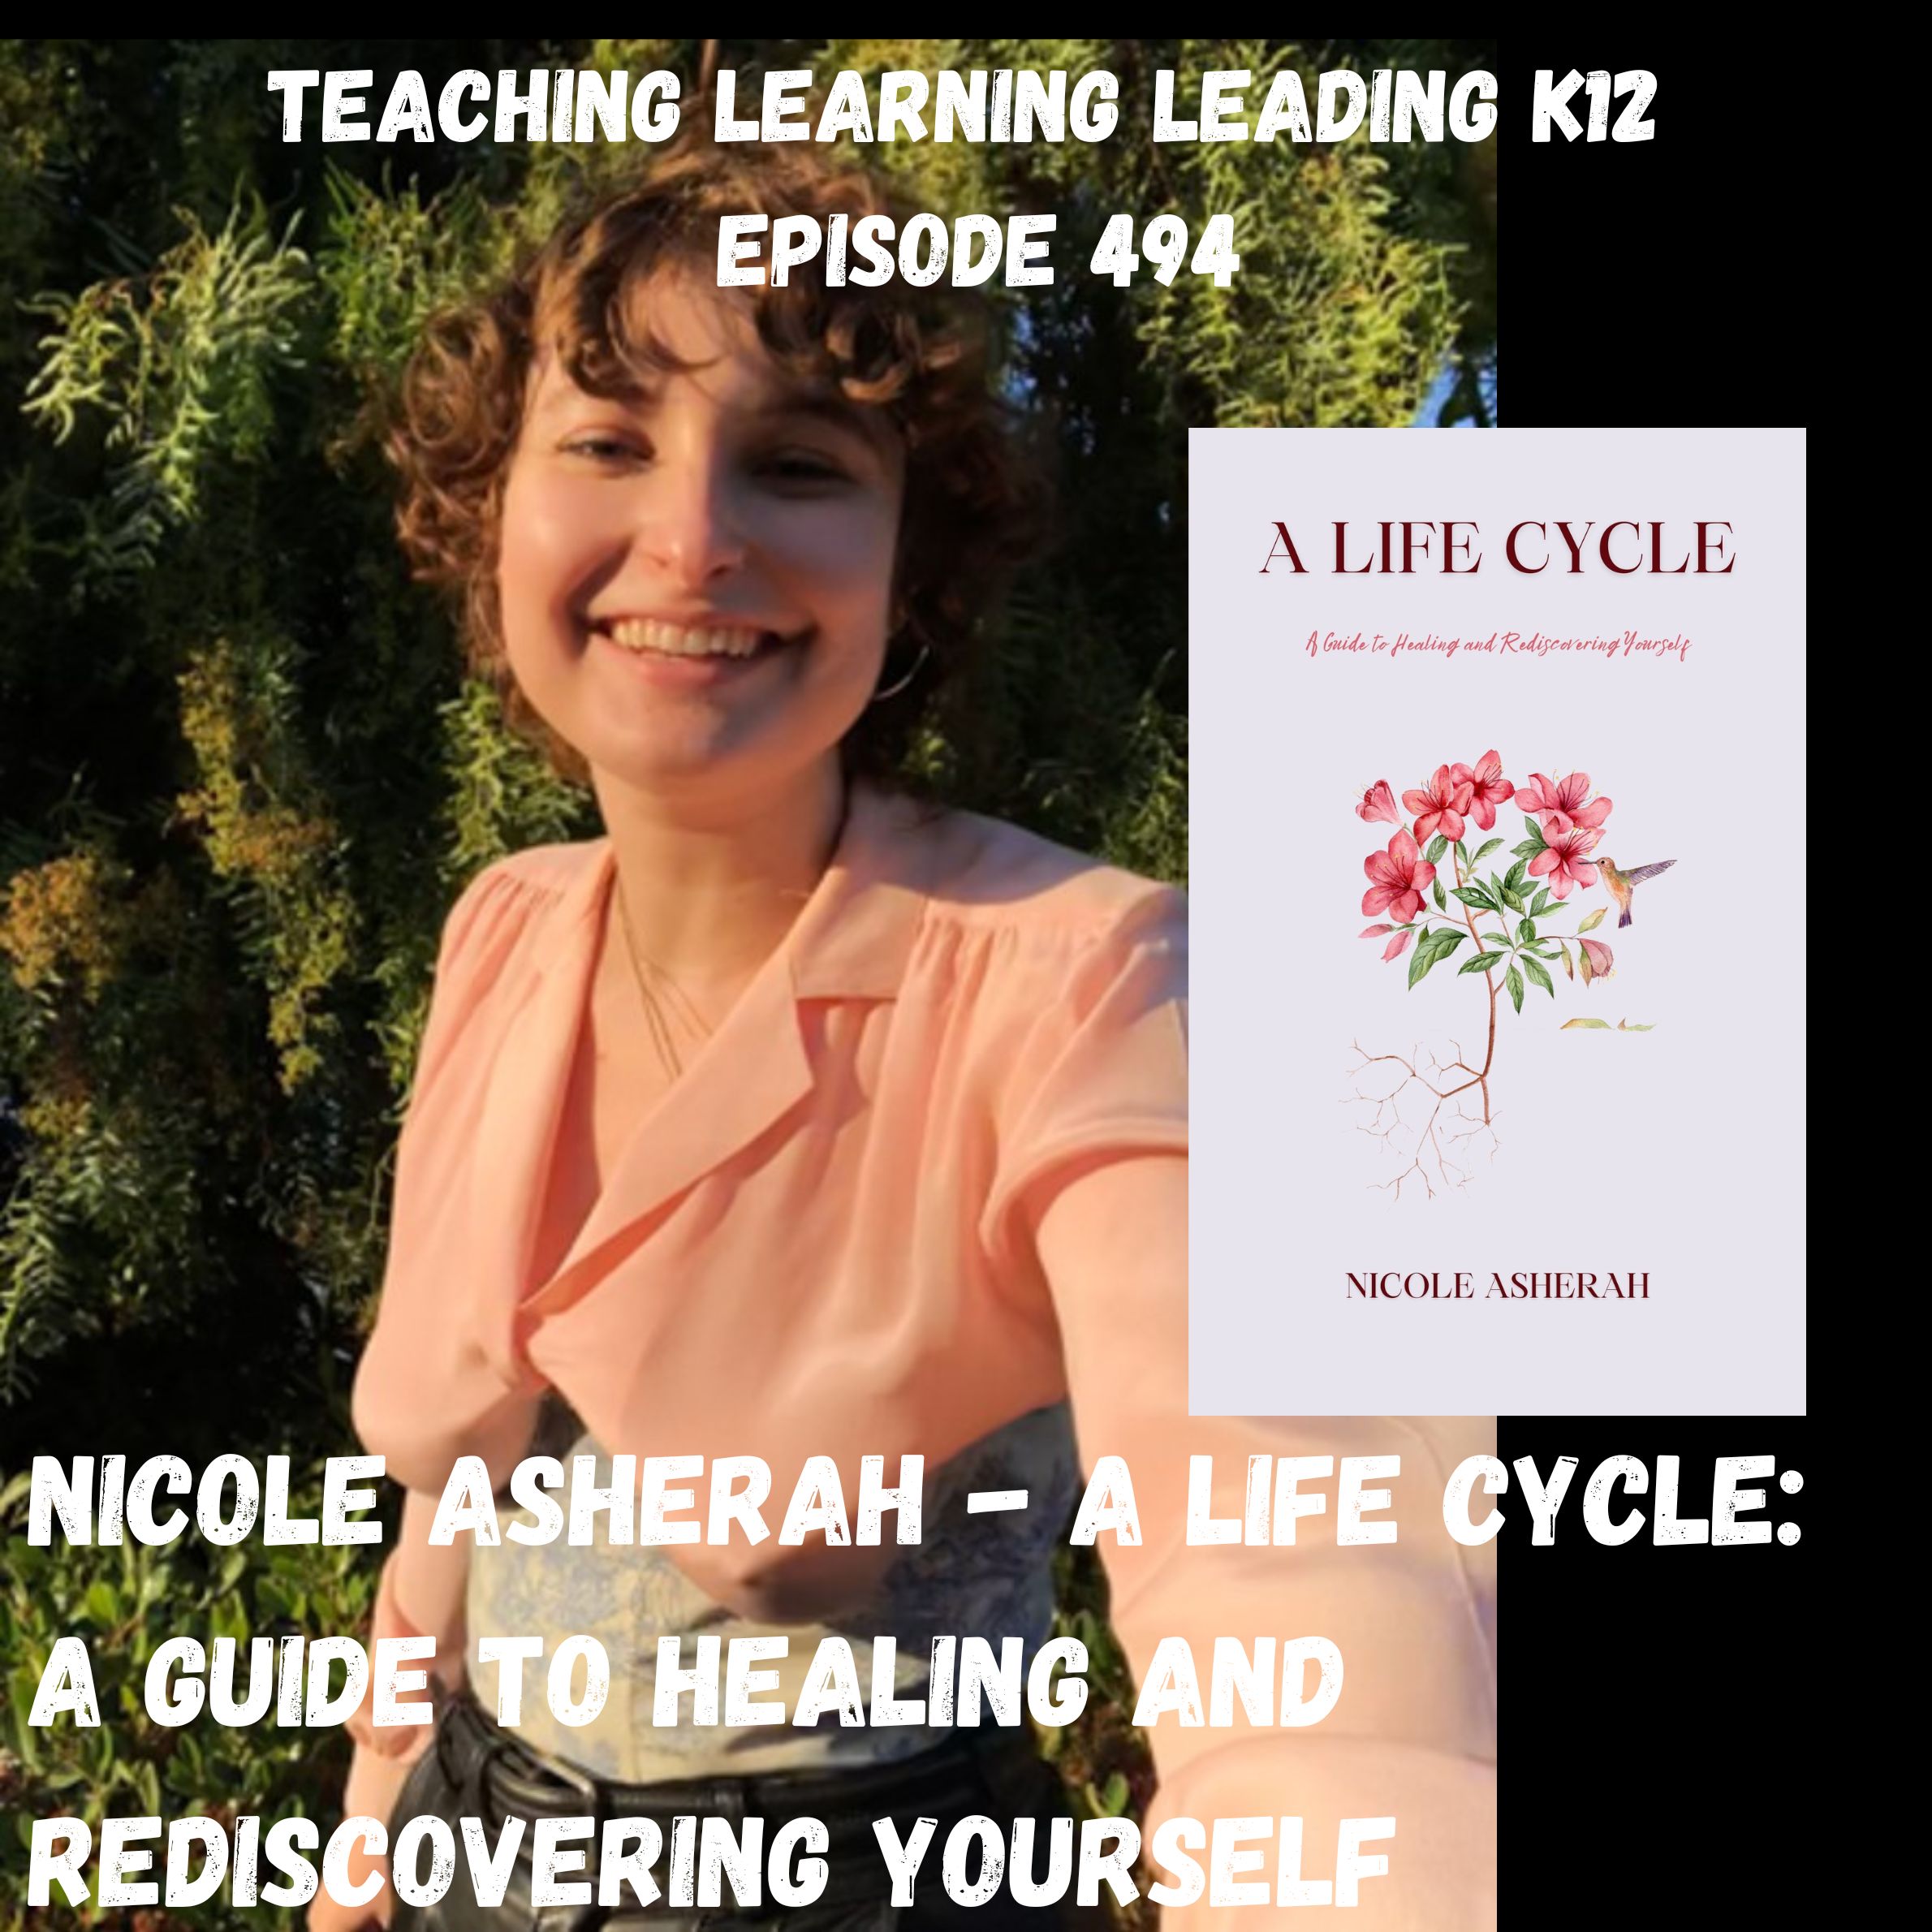 Nicole Asherah - A Life Cycle: A Guide to Healing and Rediscovering Yourself - 494 Image